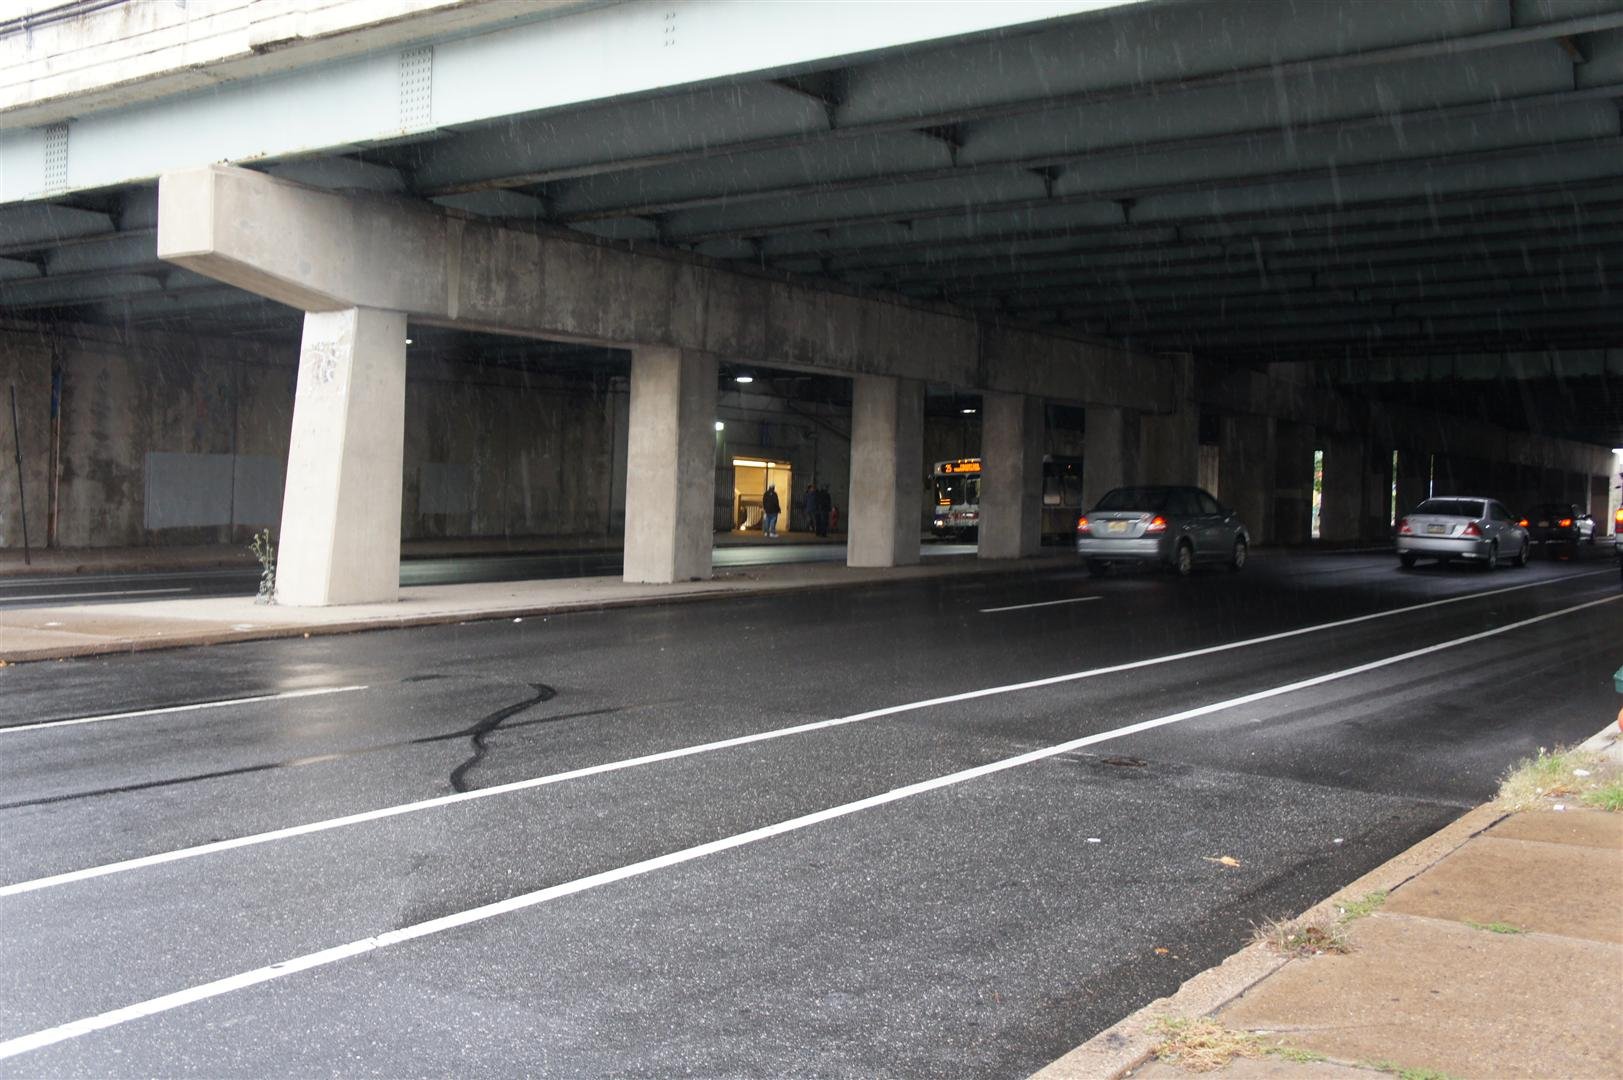 Current Spring Garden Underpass conditions. Photo courtesy DRWC